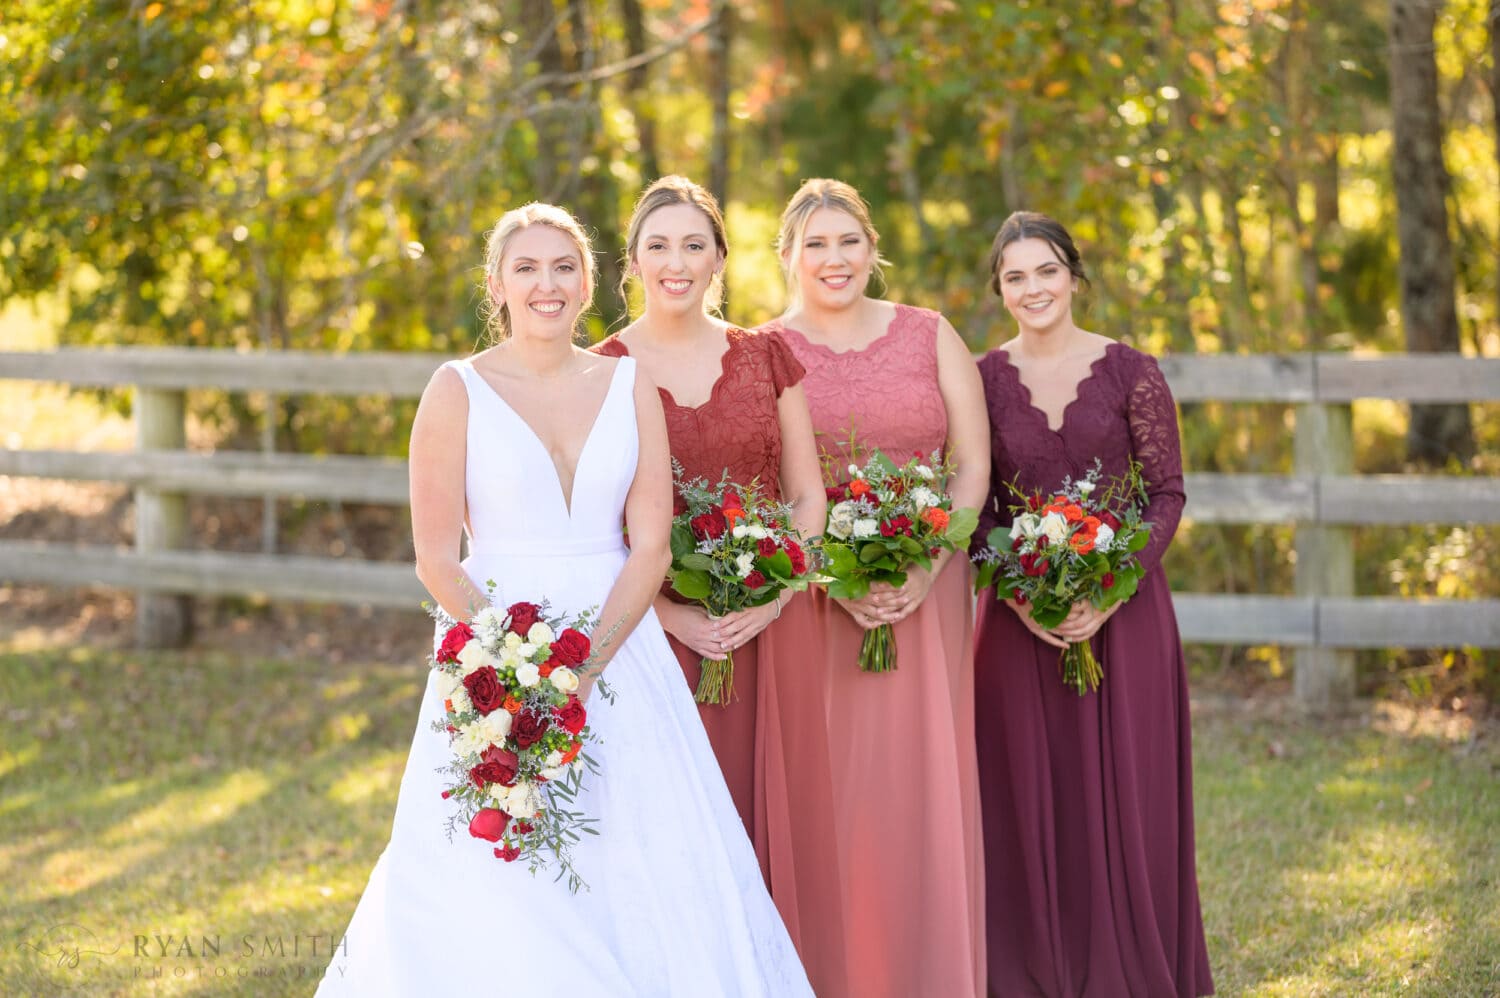 Bridesmaids standing behind the bride - The Blessed Barn